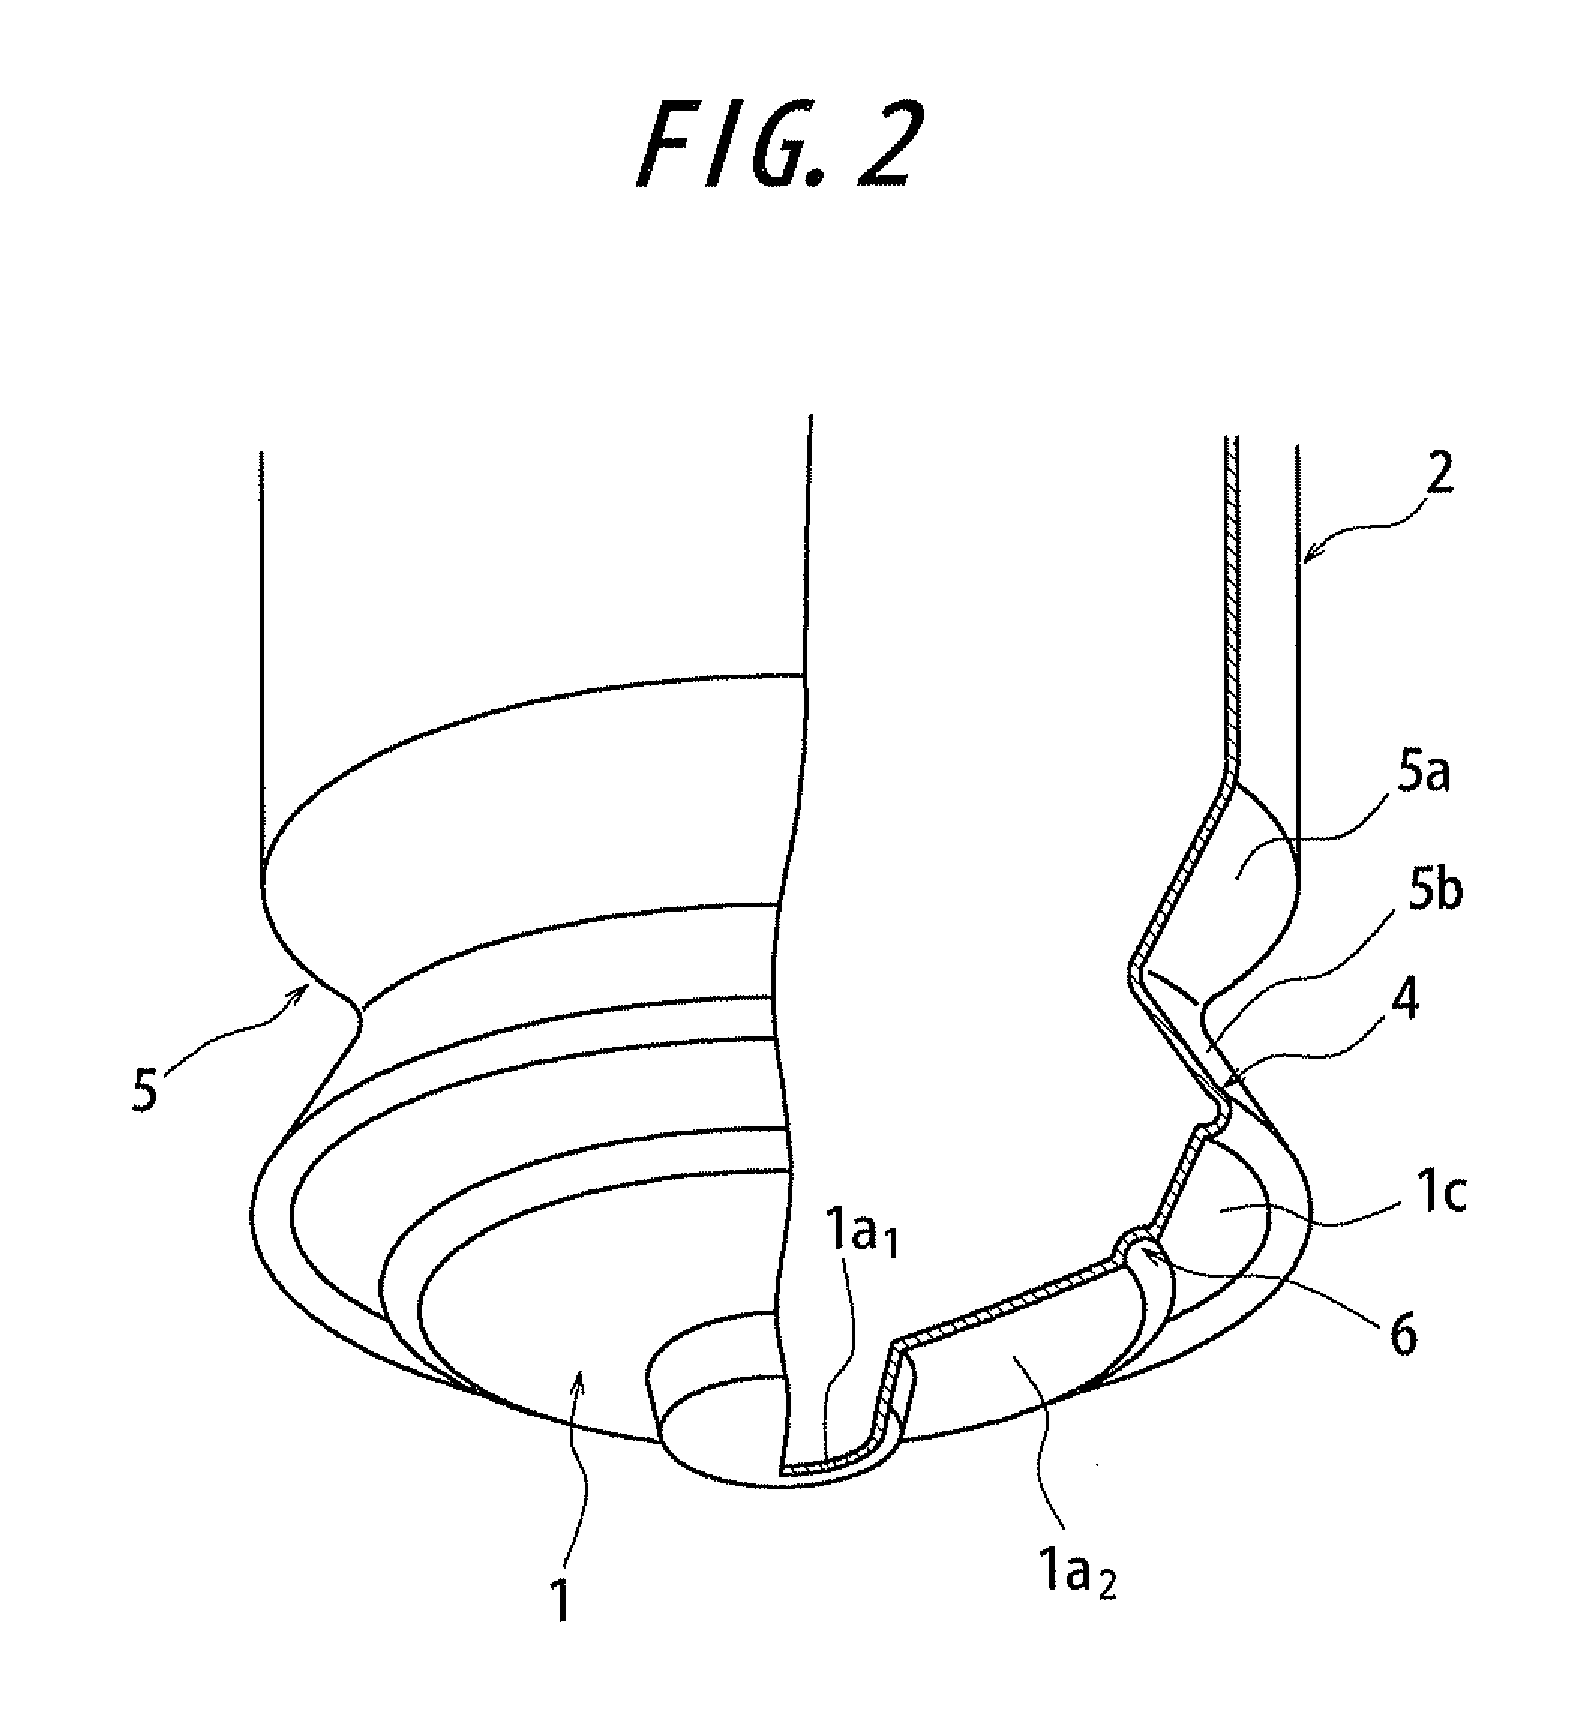 Synthetic resin container having inverted, folded back bottom wall